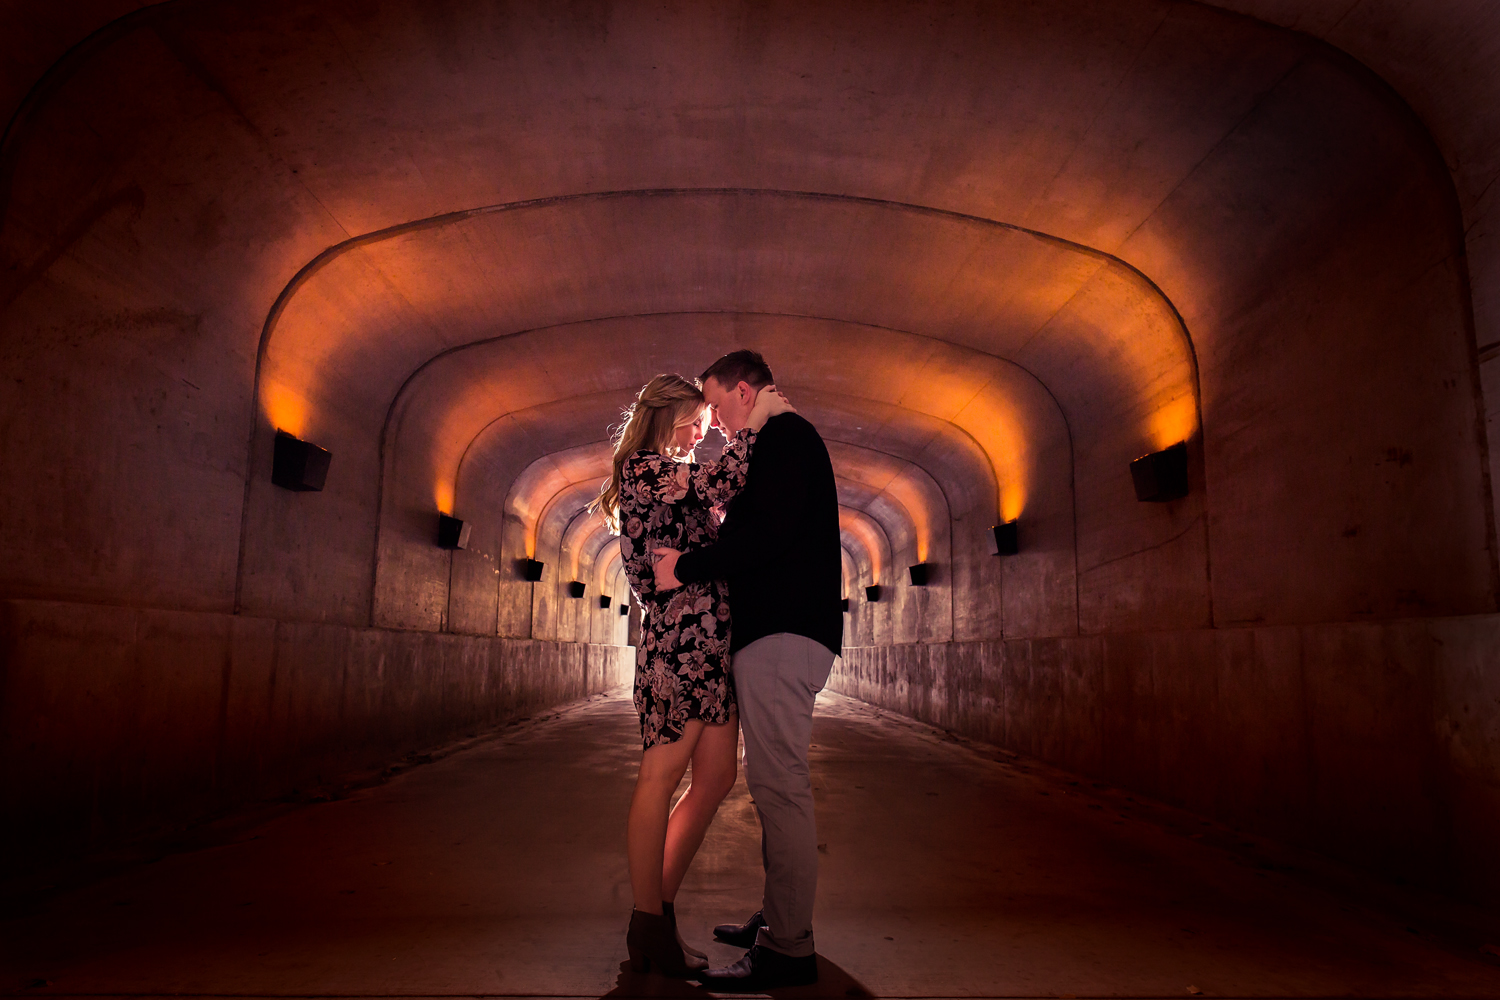 Off camera flash engagement photo session in Orange County